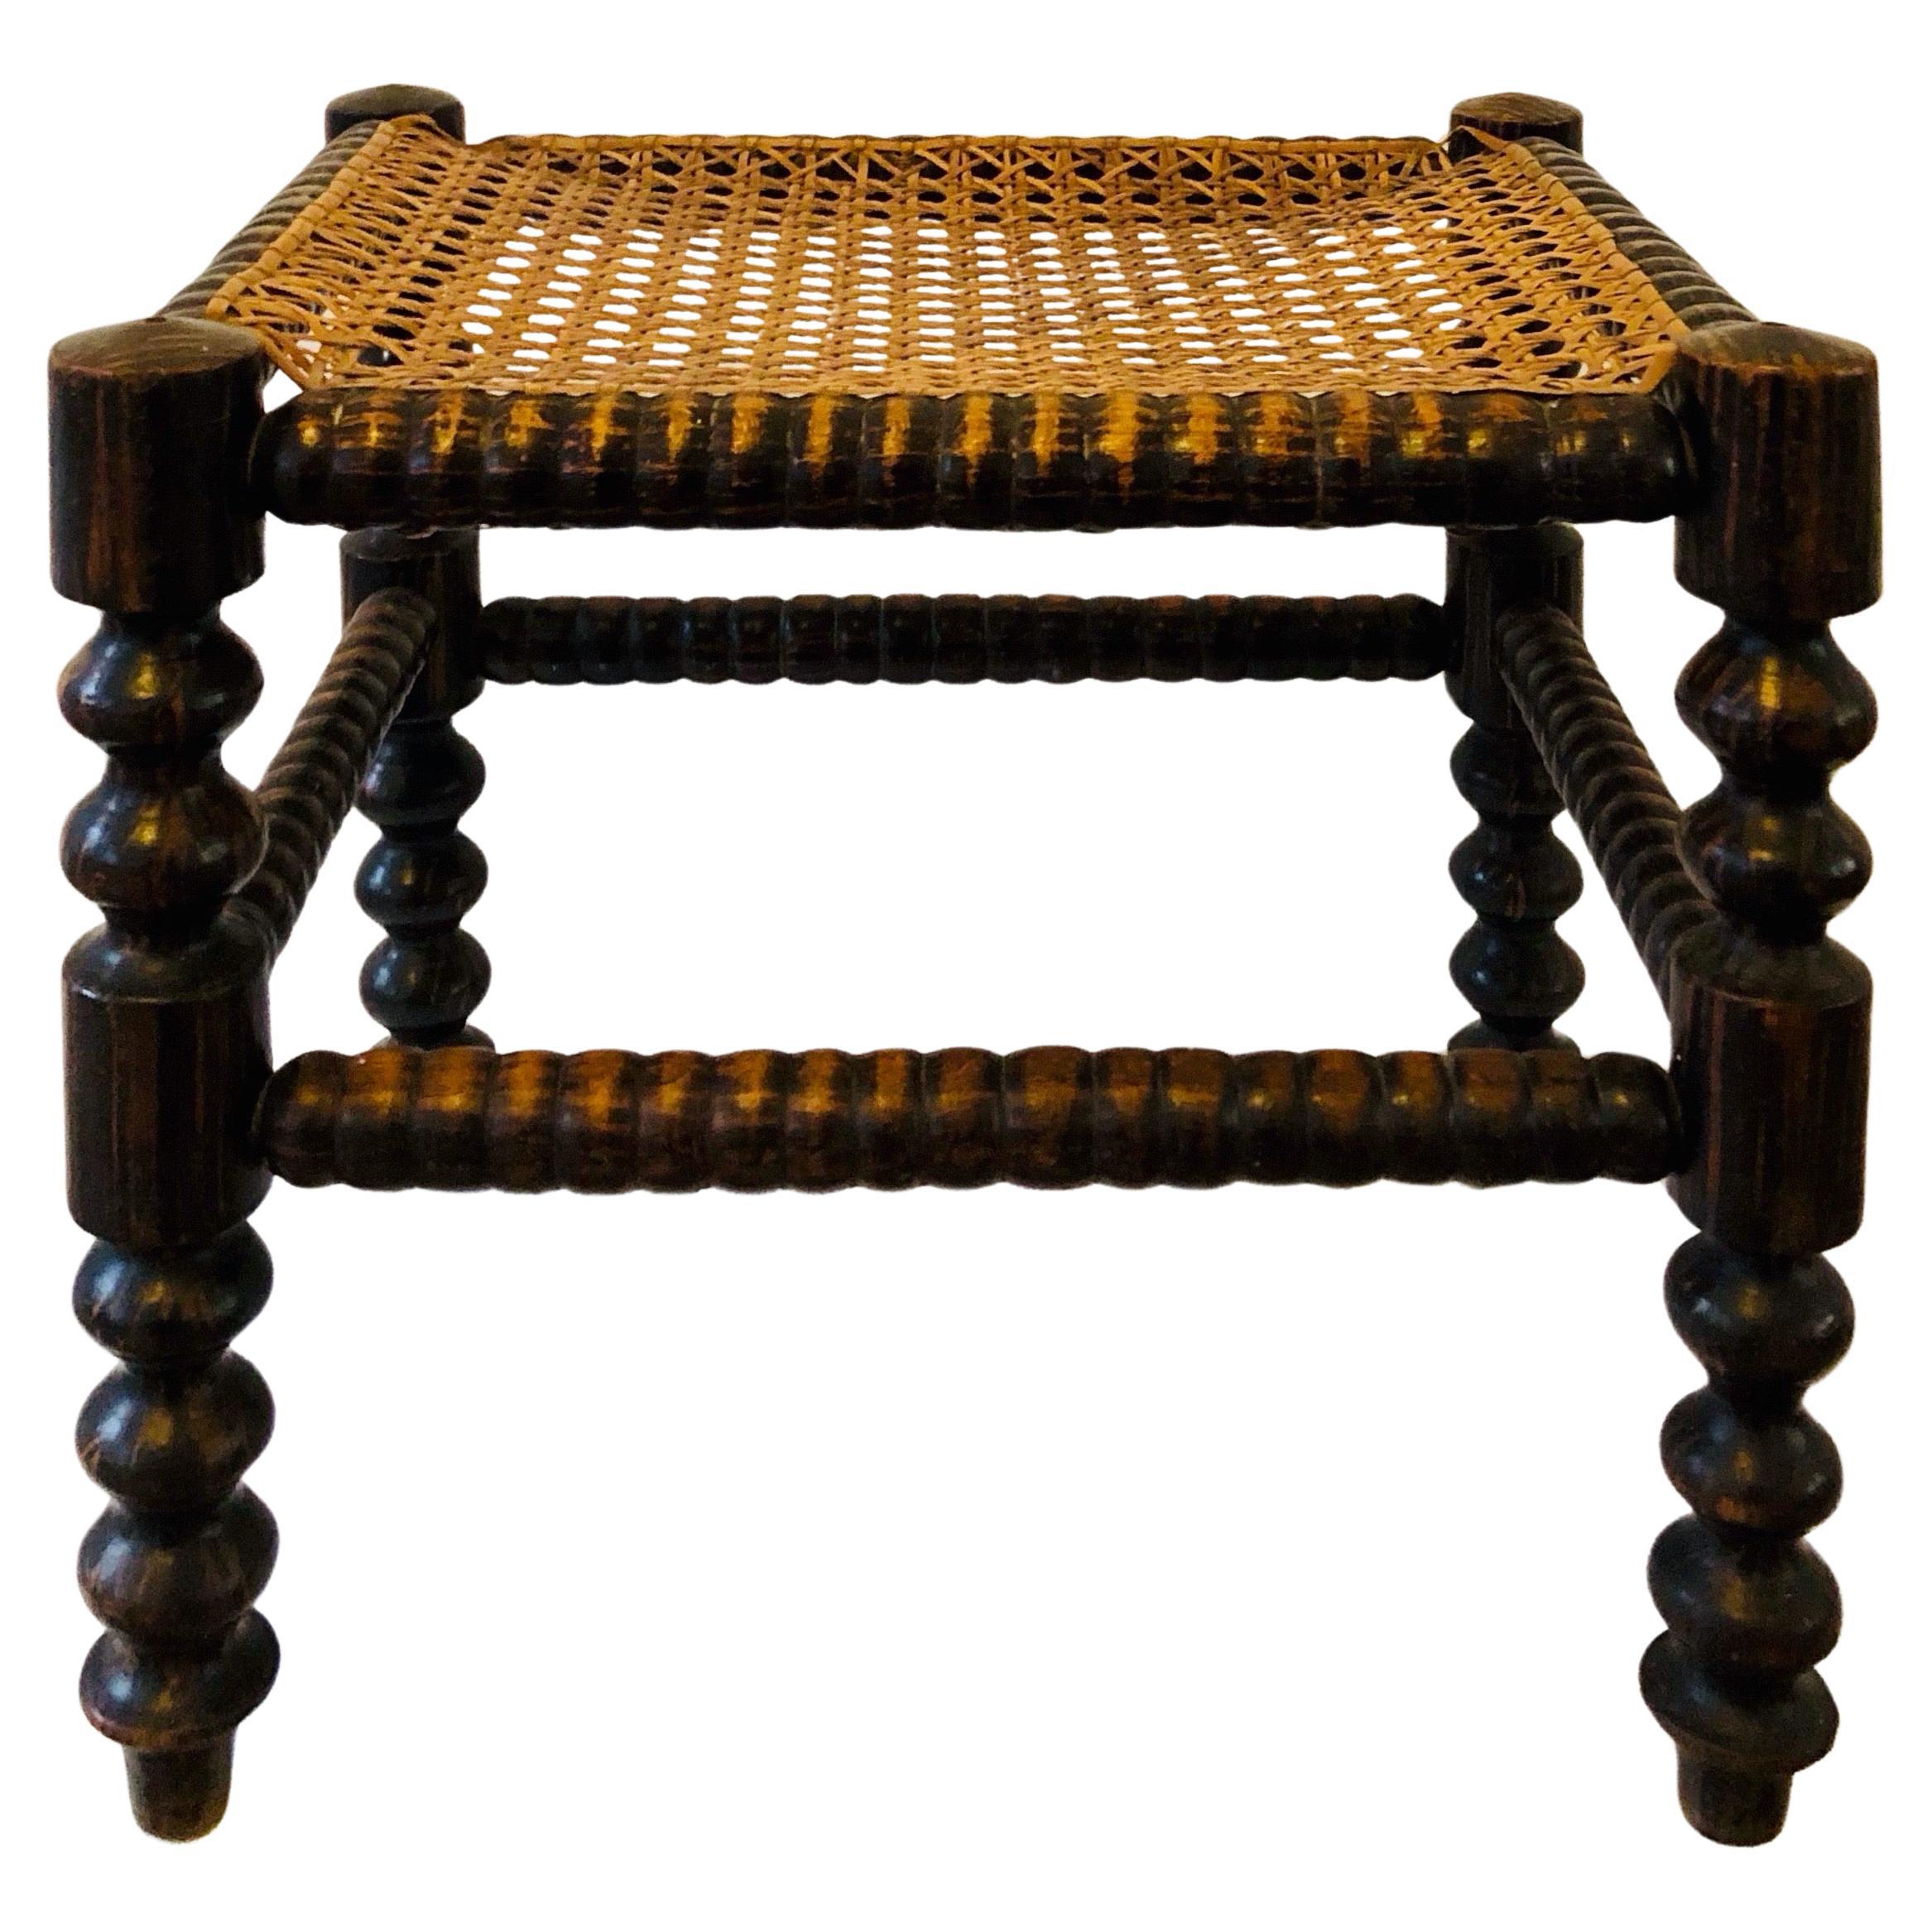 A footstool from the early 20th century - turned wood and caning - France. For Sale